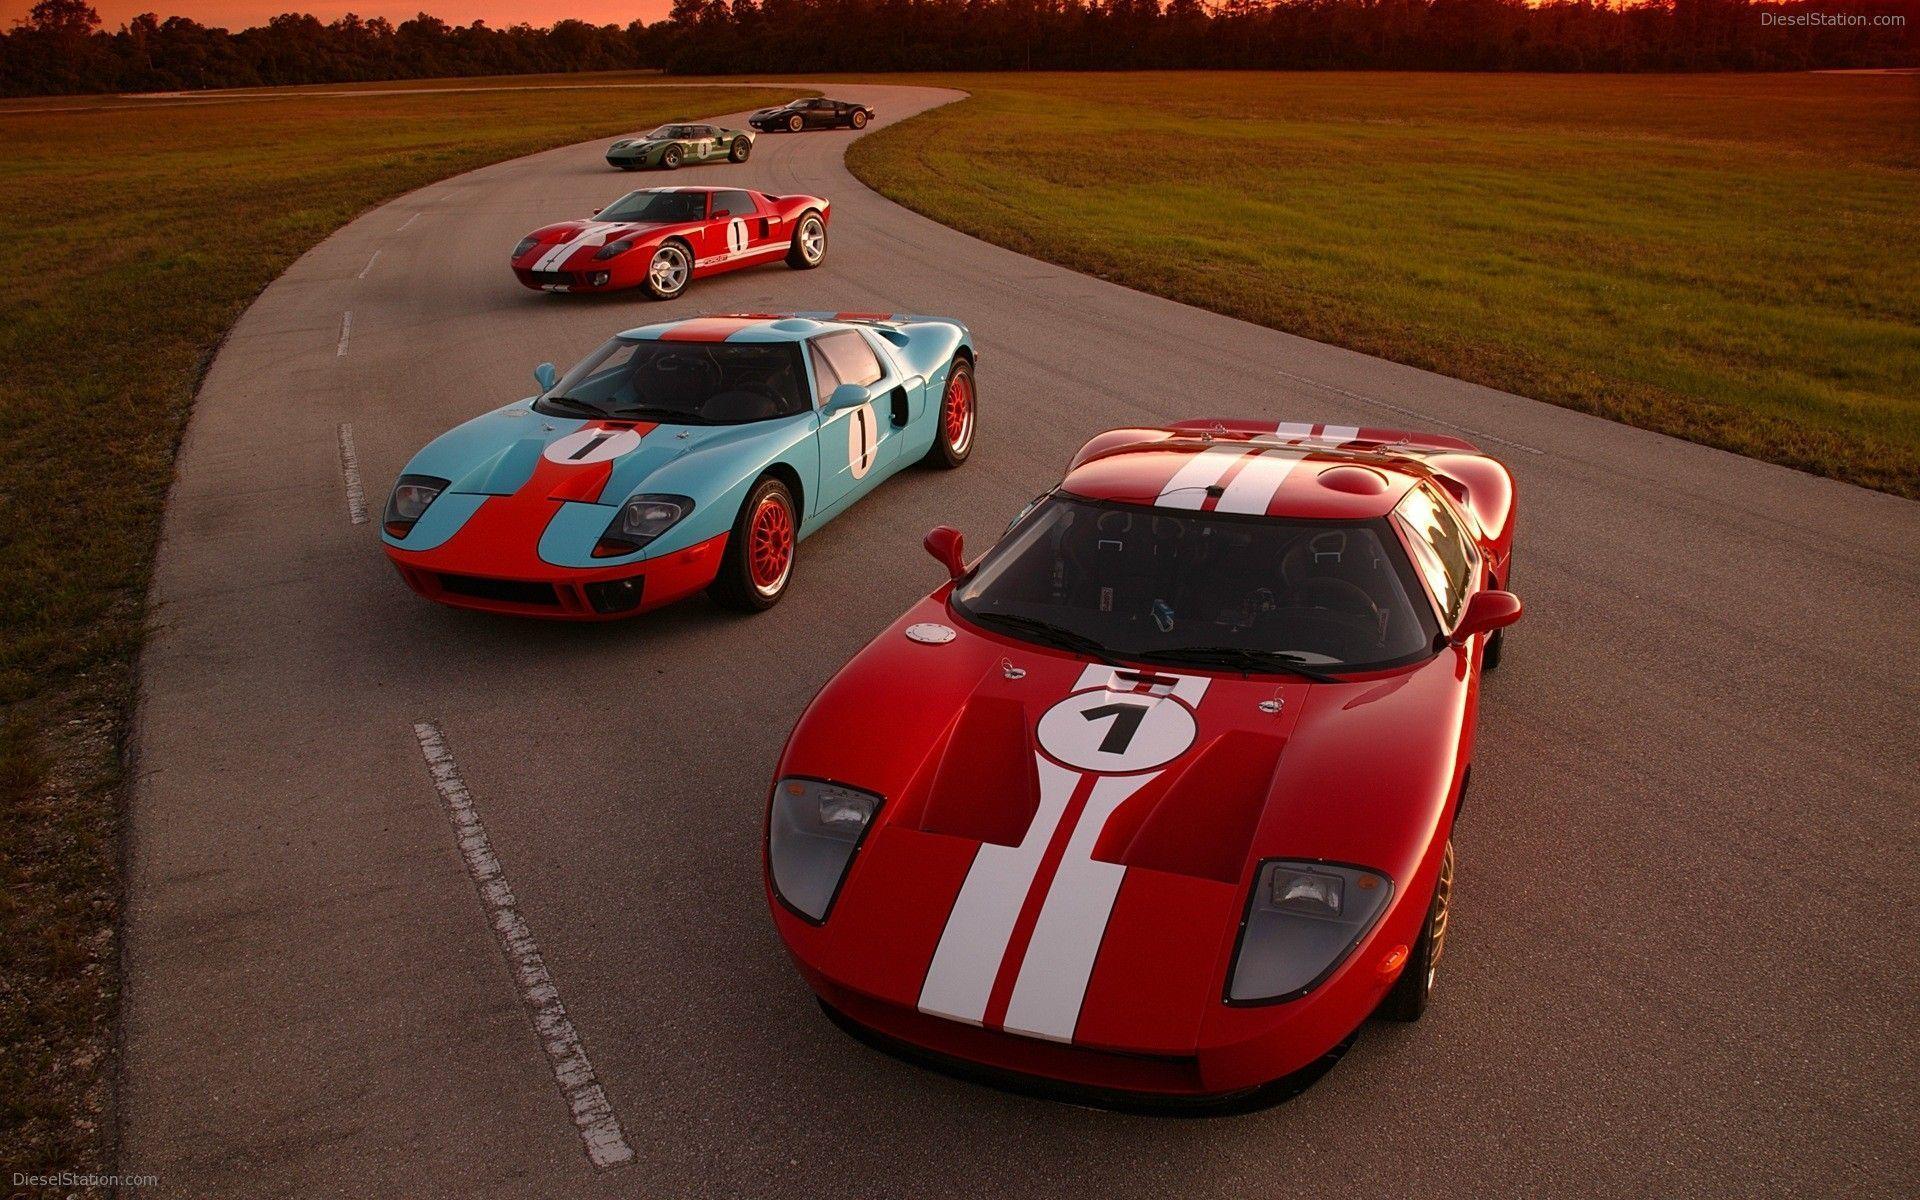 Wallpaper For > Ford Gt40 Wallpaper High Resolution. Cars